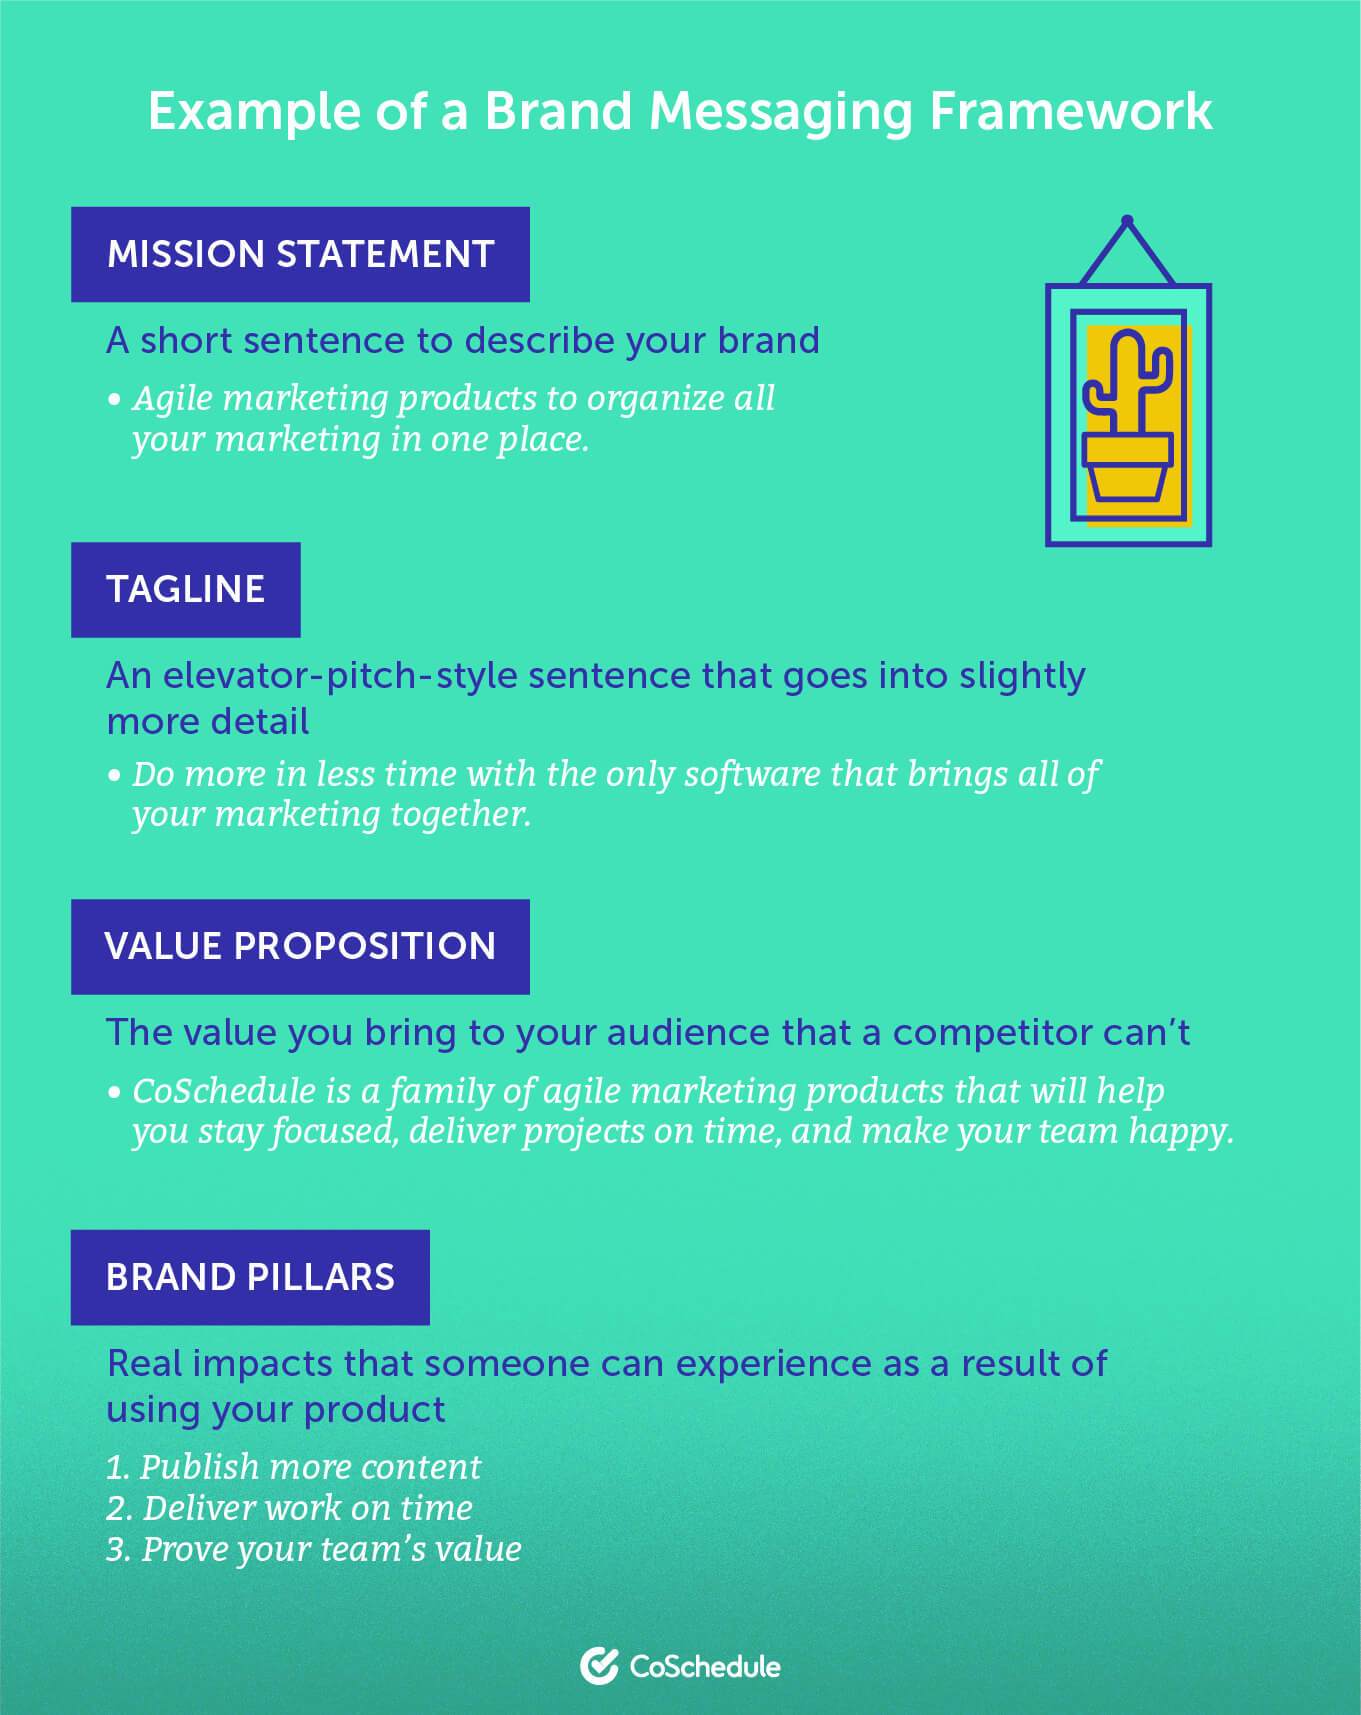 Brand messaging framework infographic from Coschedule